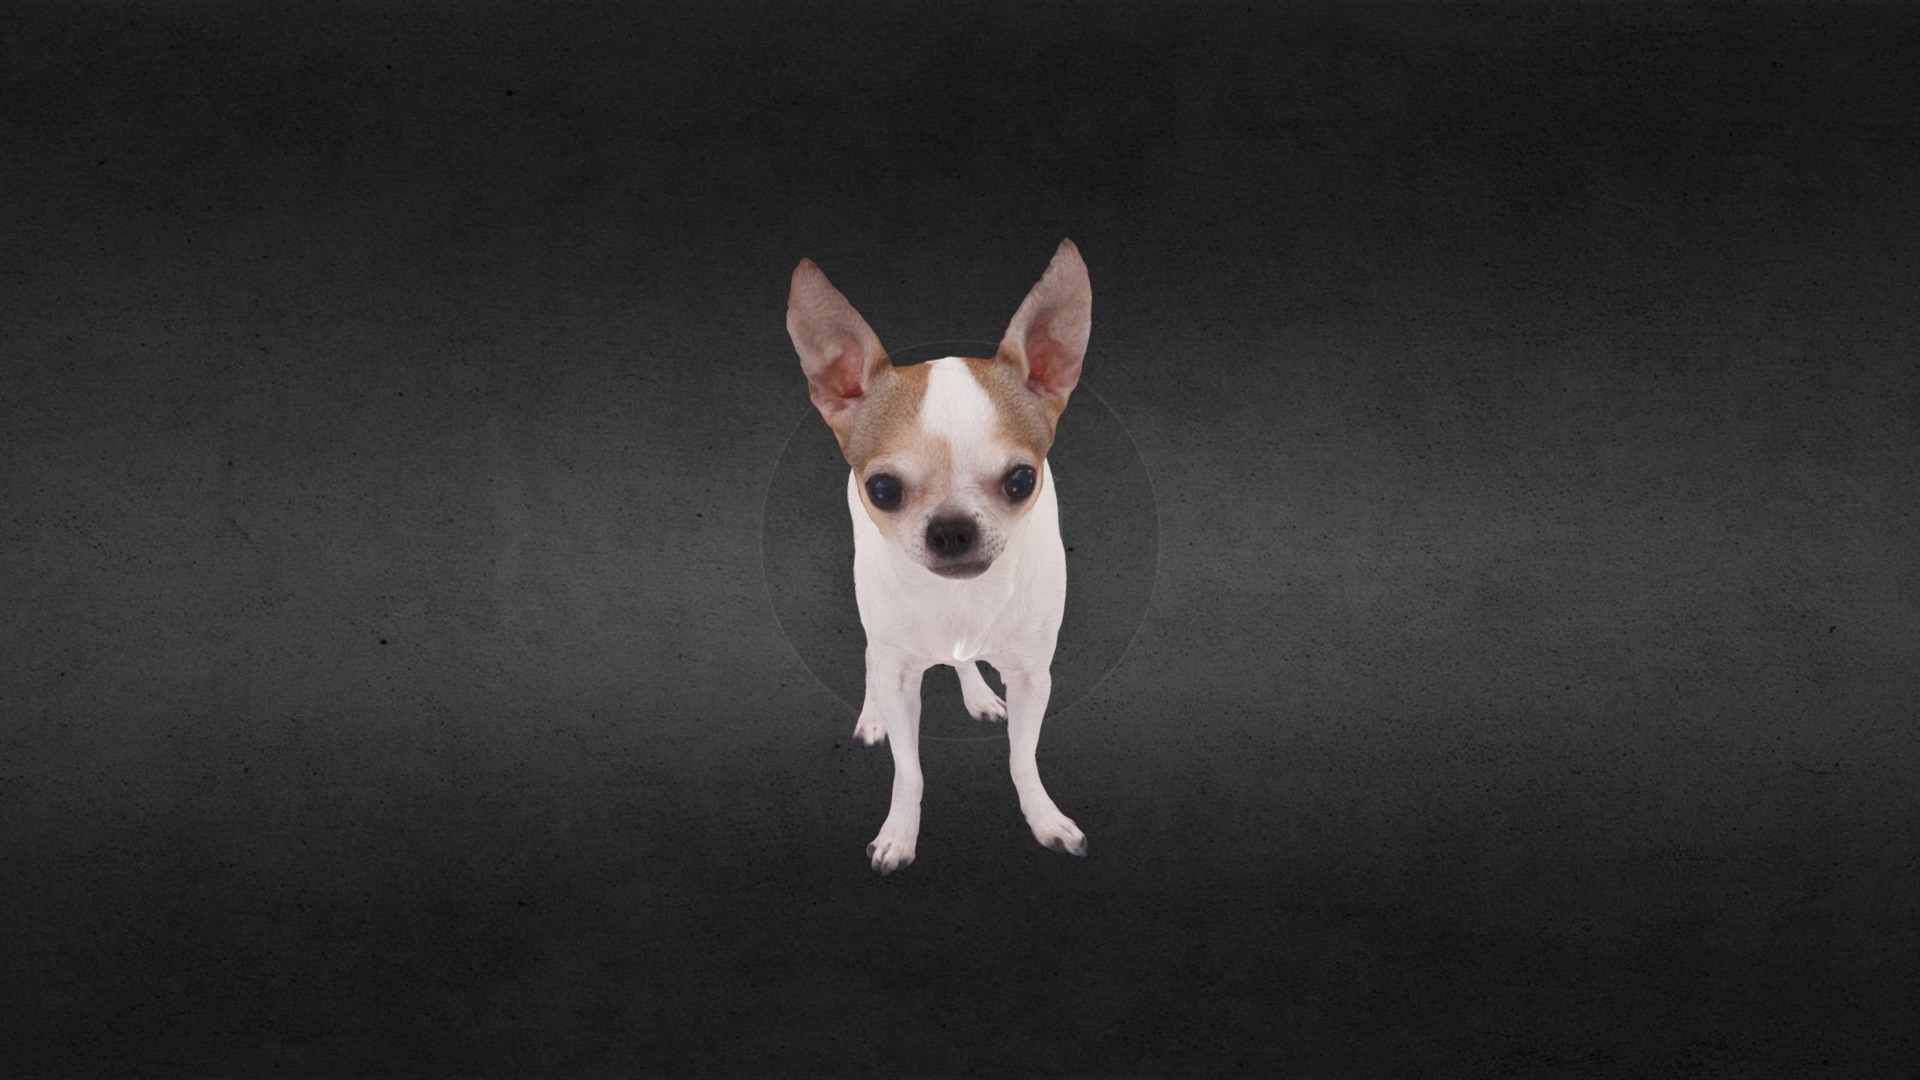 3D model C_Dog-633 - This is a 3D model of the C_Dog-633. The 3D model is about a dog standing on a carpet.